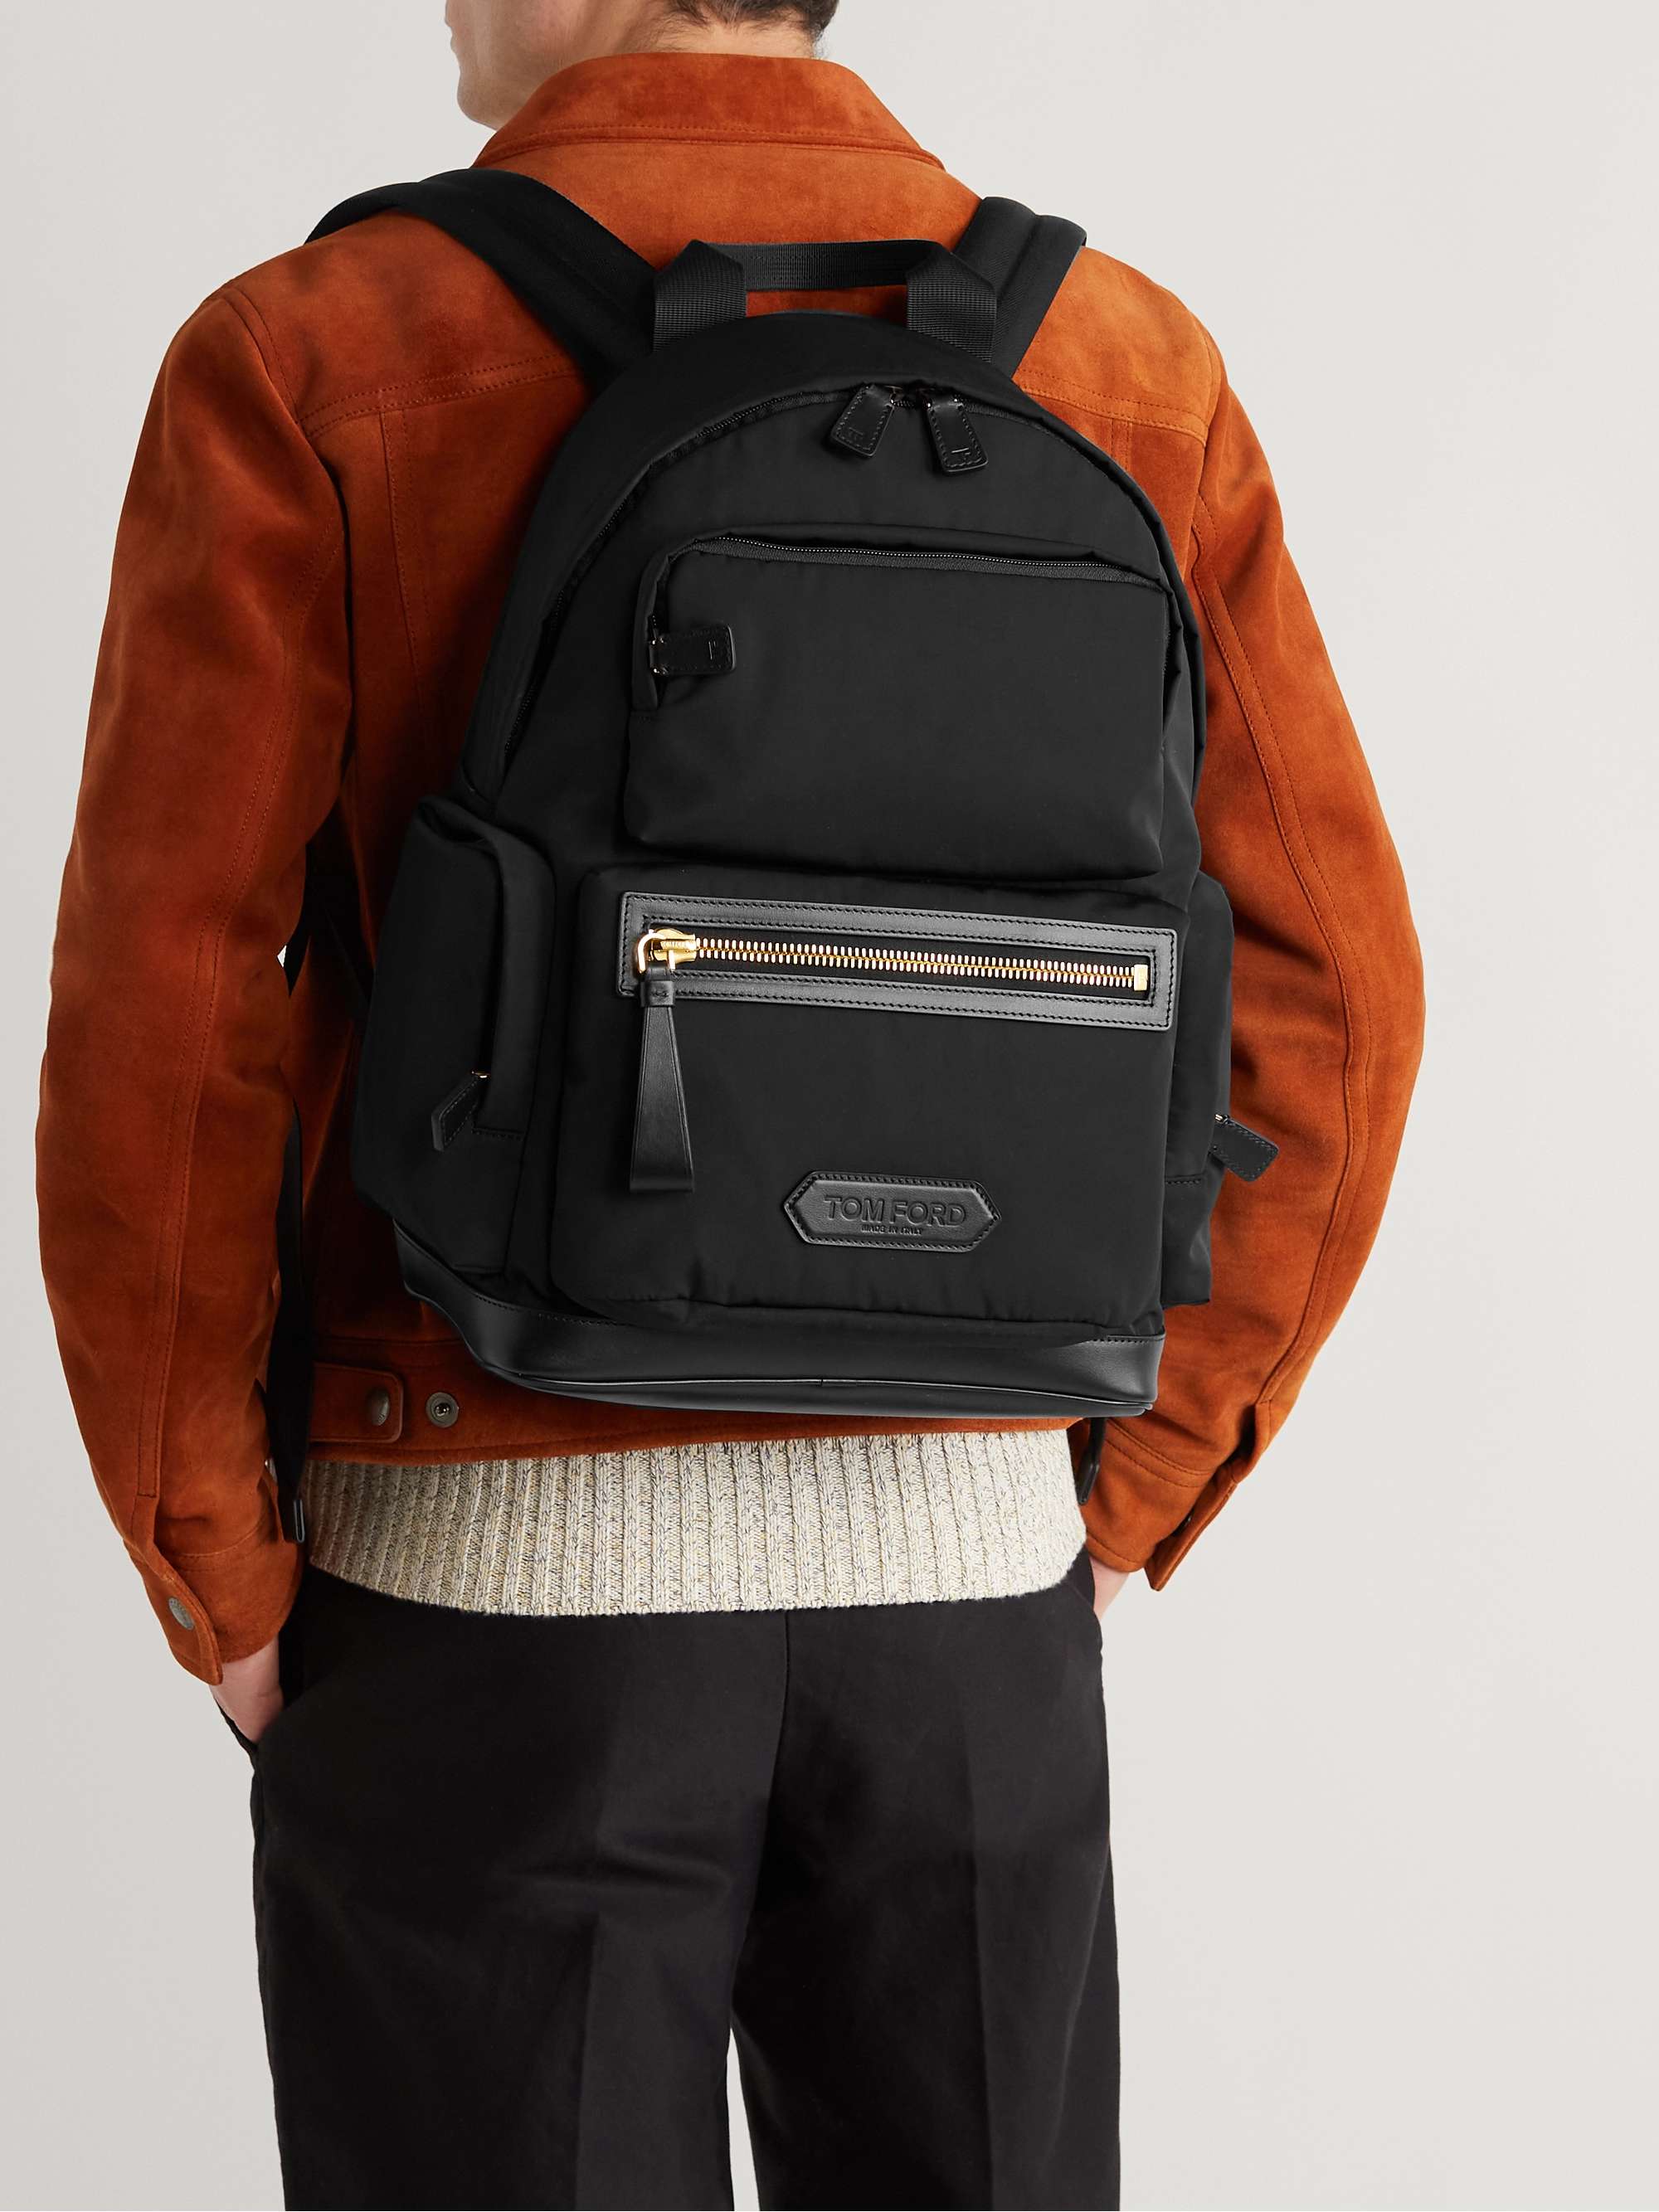 TOM FORD Leather-Trimmed Recycled Nylon Backpack